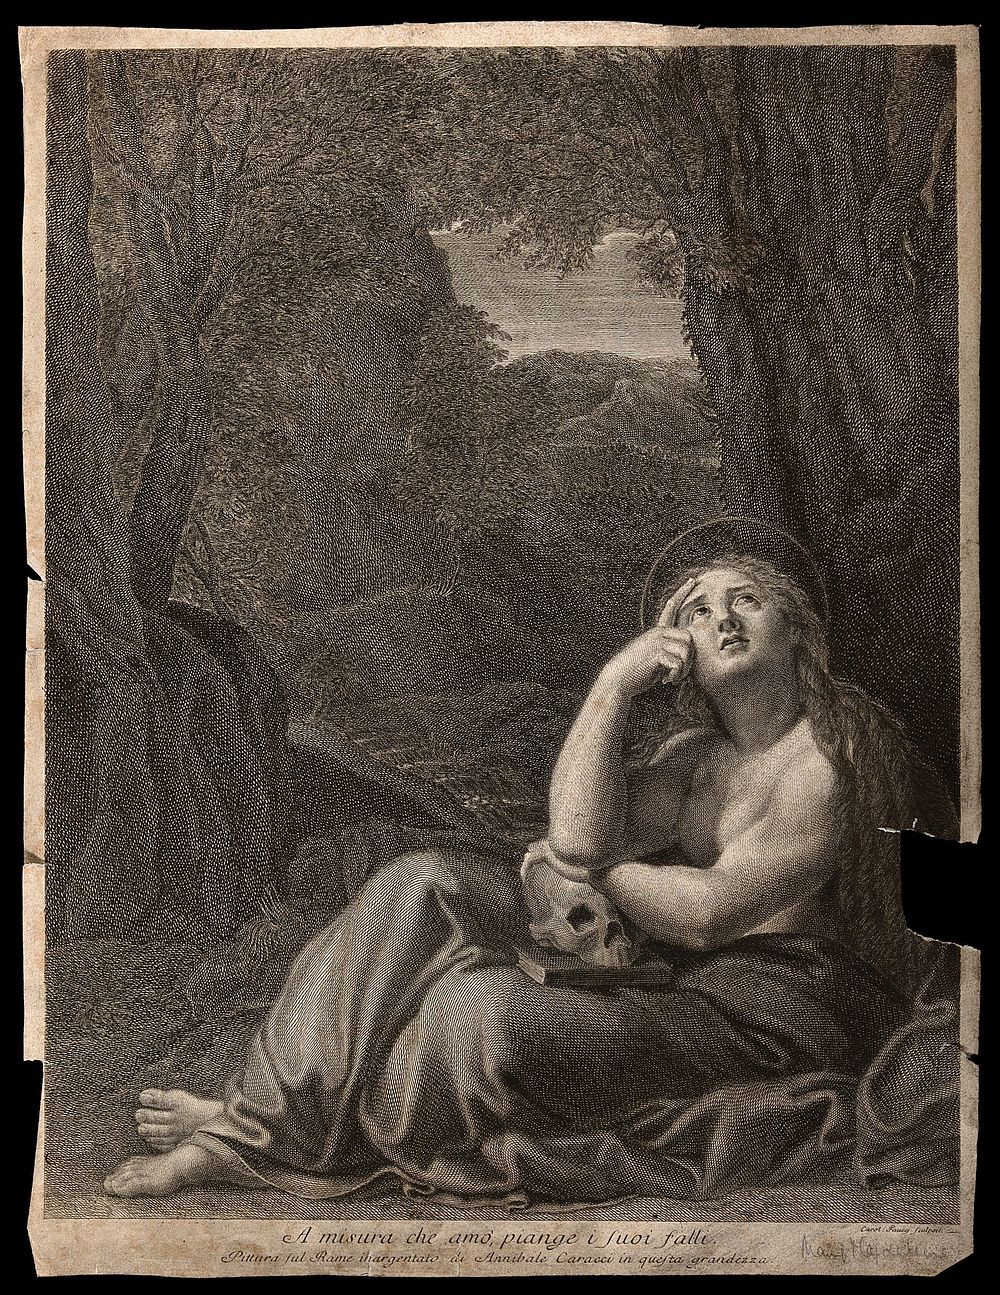 Saint Mary Magdalen. Engraving by C. Faucci after Annibale Carracci.